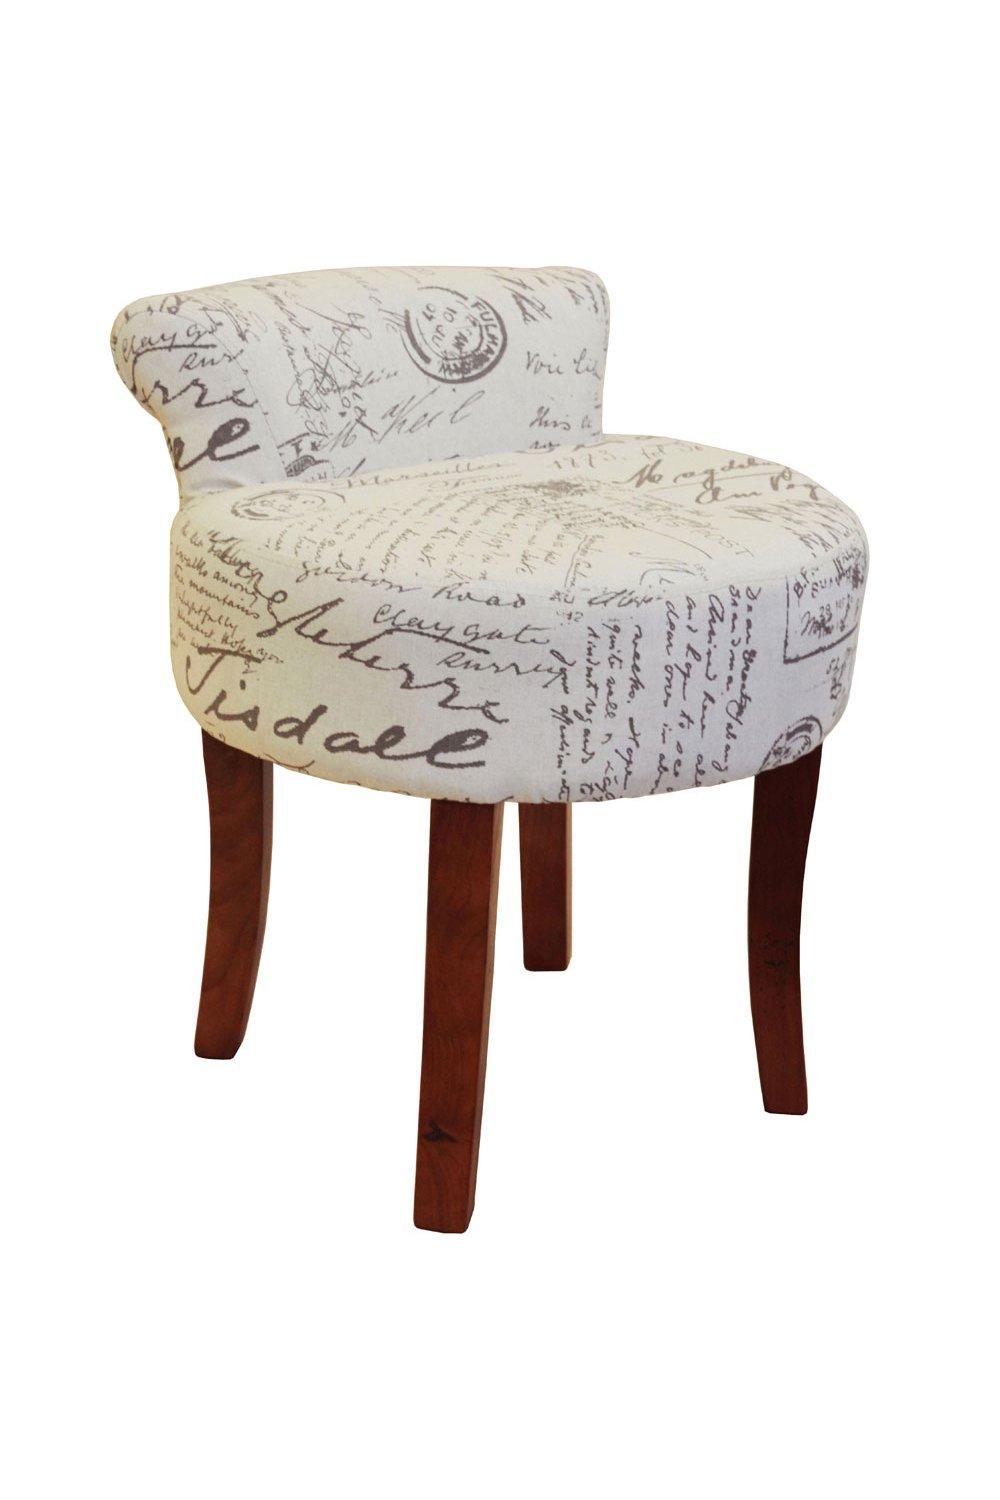 'Lyon' - Low Back Chair  Padded Stool With Retro French Print And Wood Legs - Cream  Brown